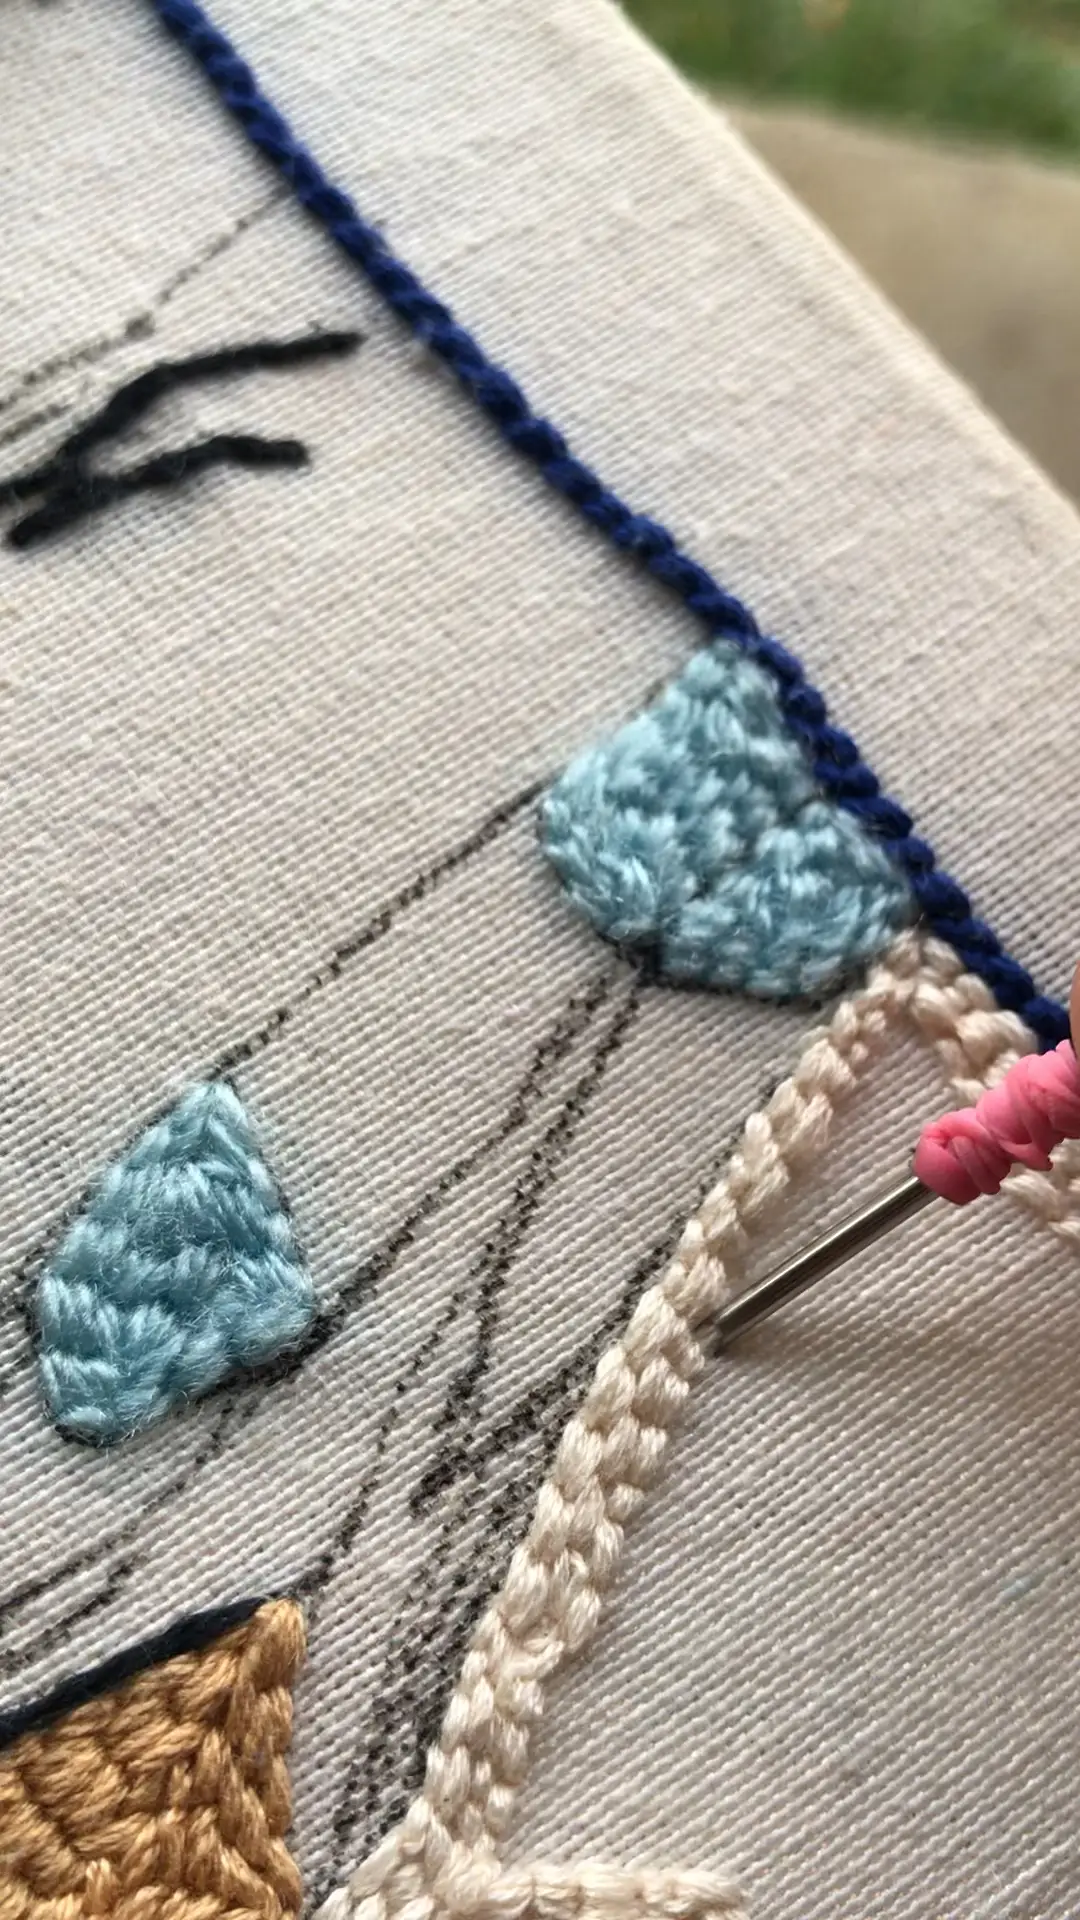 how to make a punch needle frame! 🧶🌈